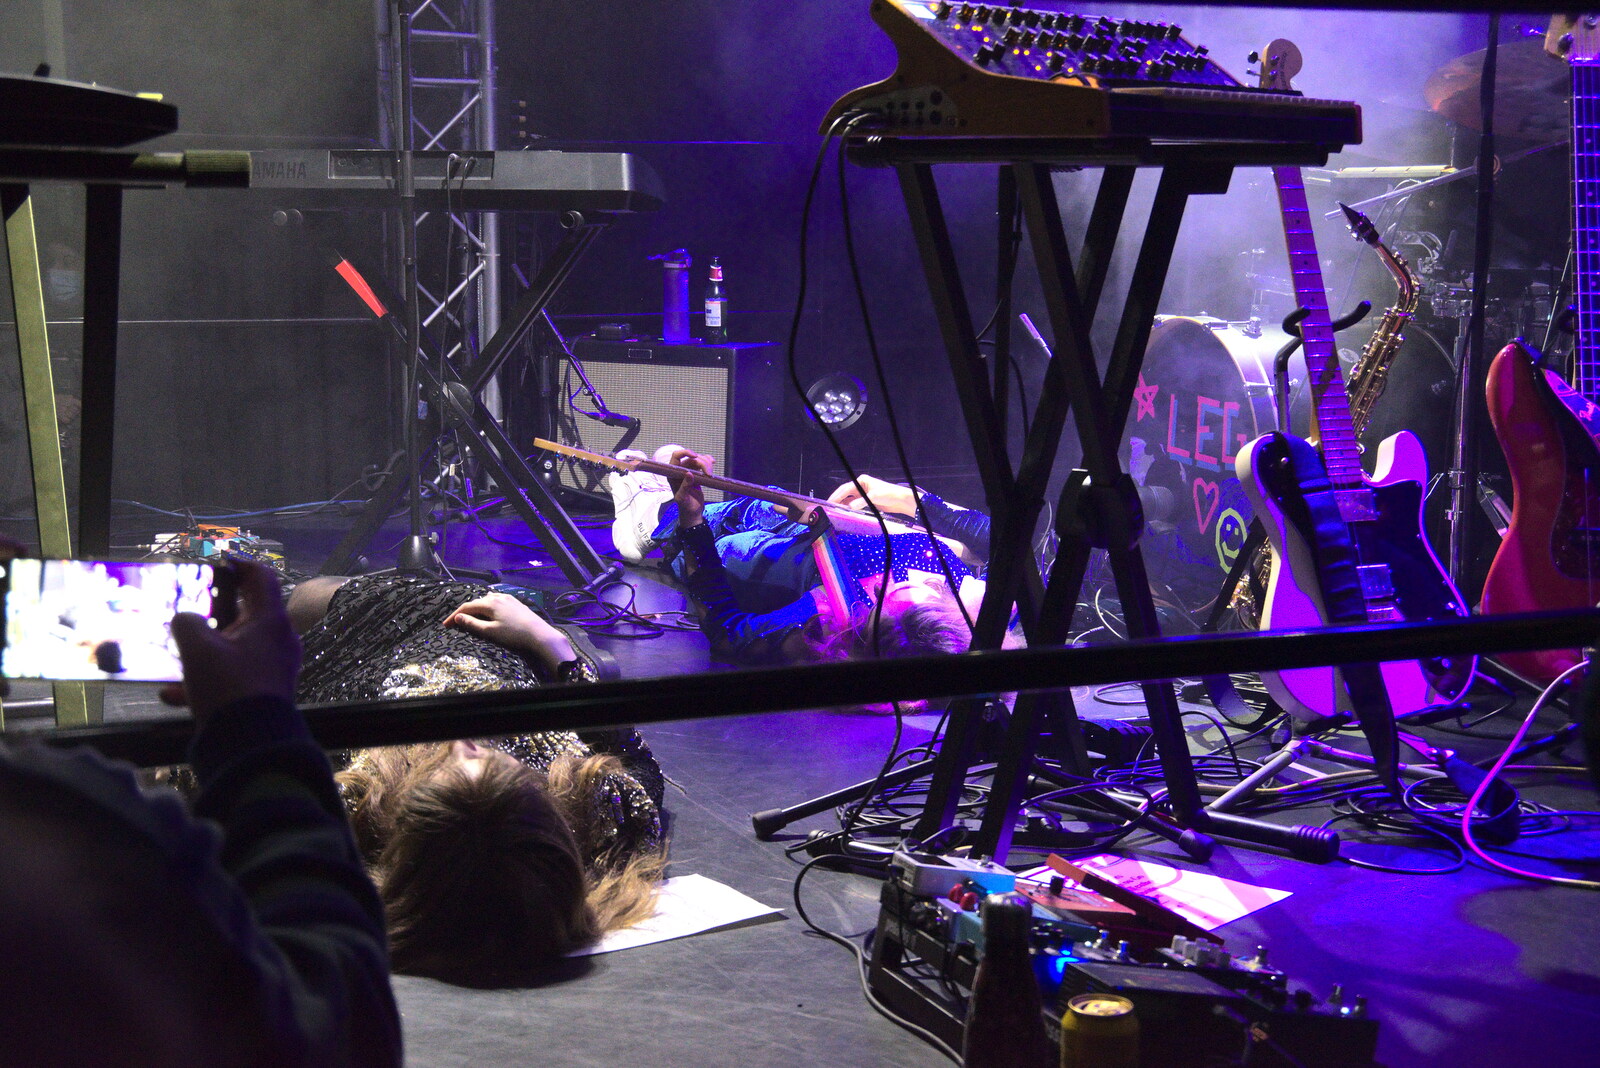 Vanity Fairy and Let's Eat Grandma, Arts Centre, Norwich - 26th January 2022: Lying down on stage to perform Donnie Darko